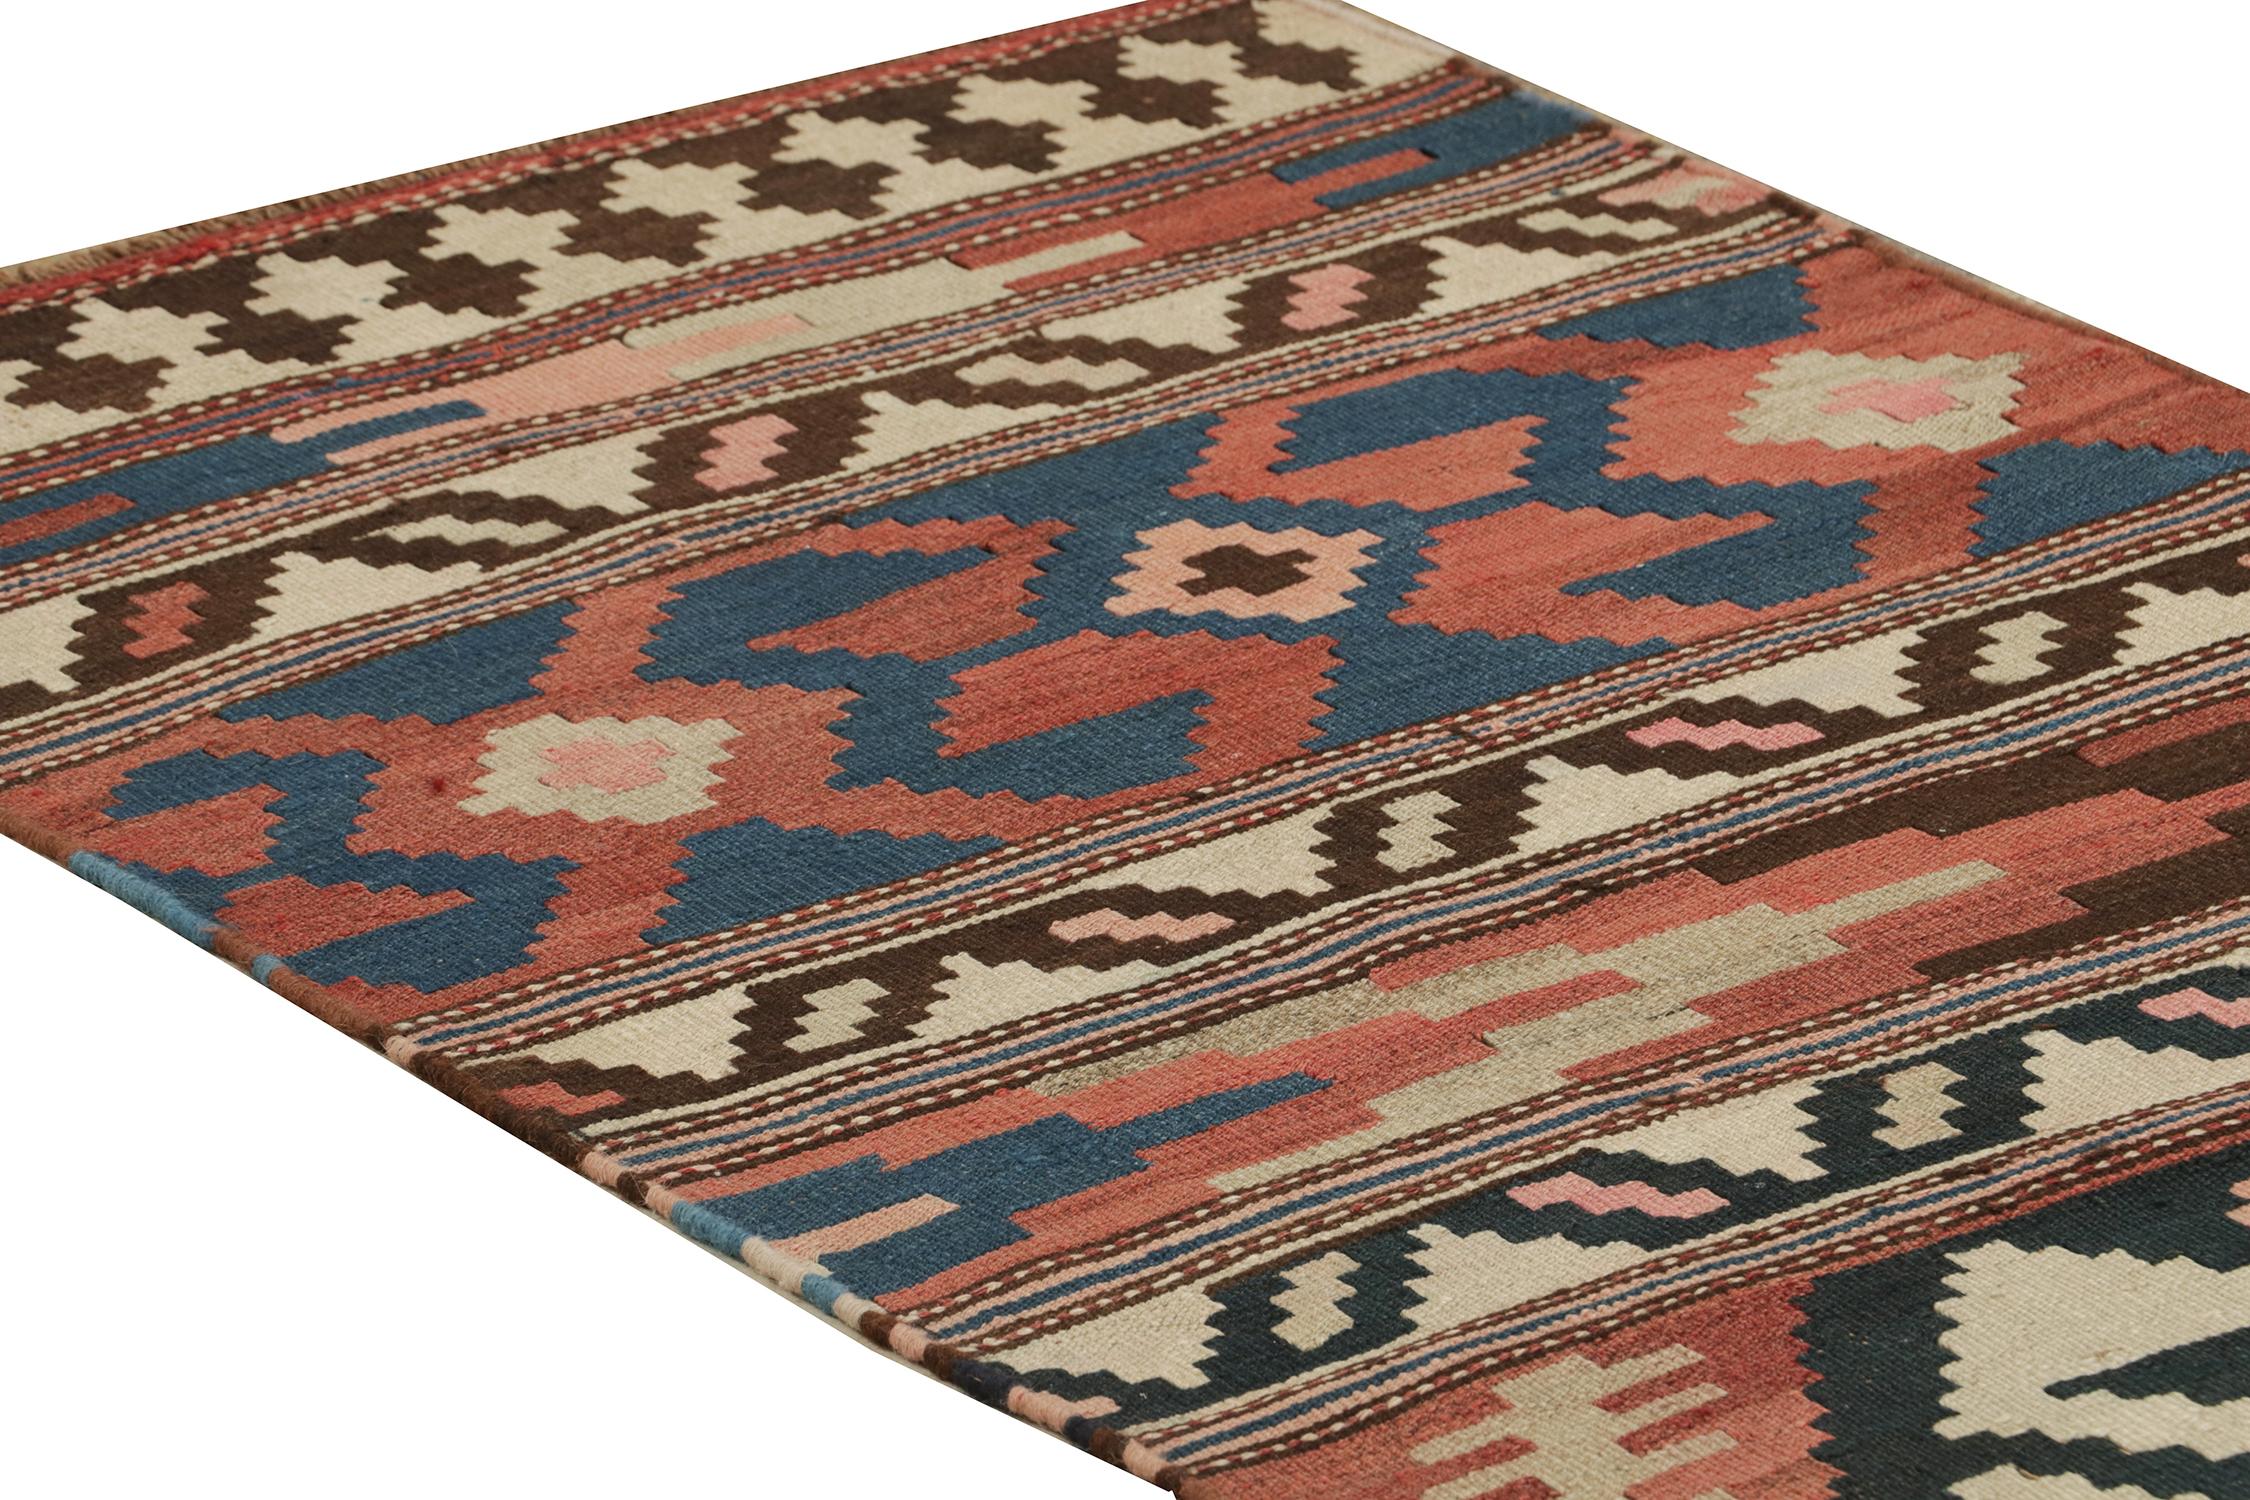 Hand-Knotted Vintage Persian Kilim Runner in Polychromatic Geometric Patterns